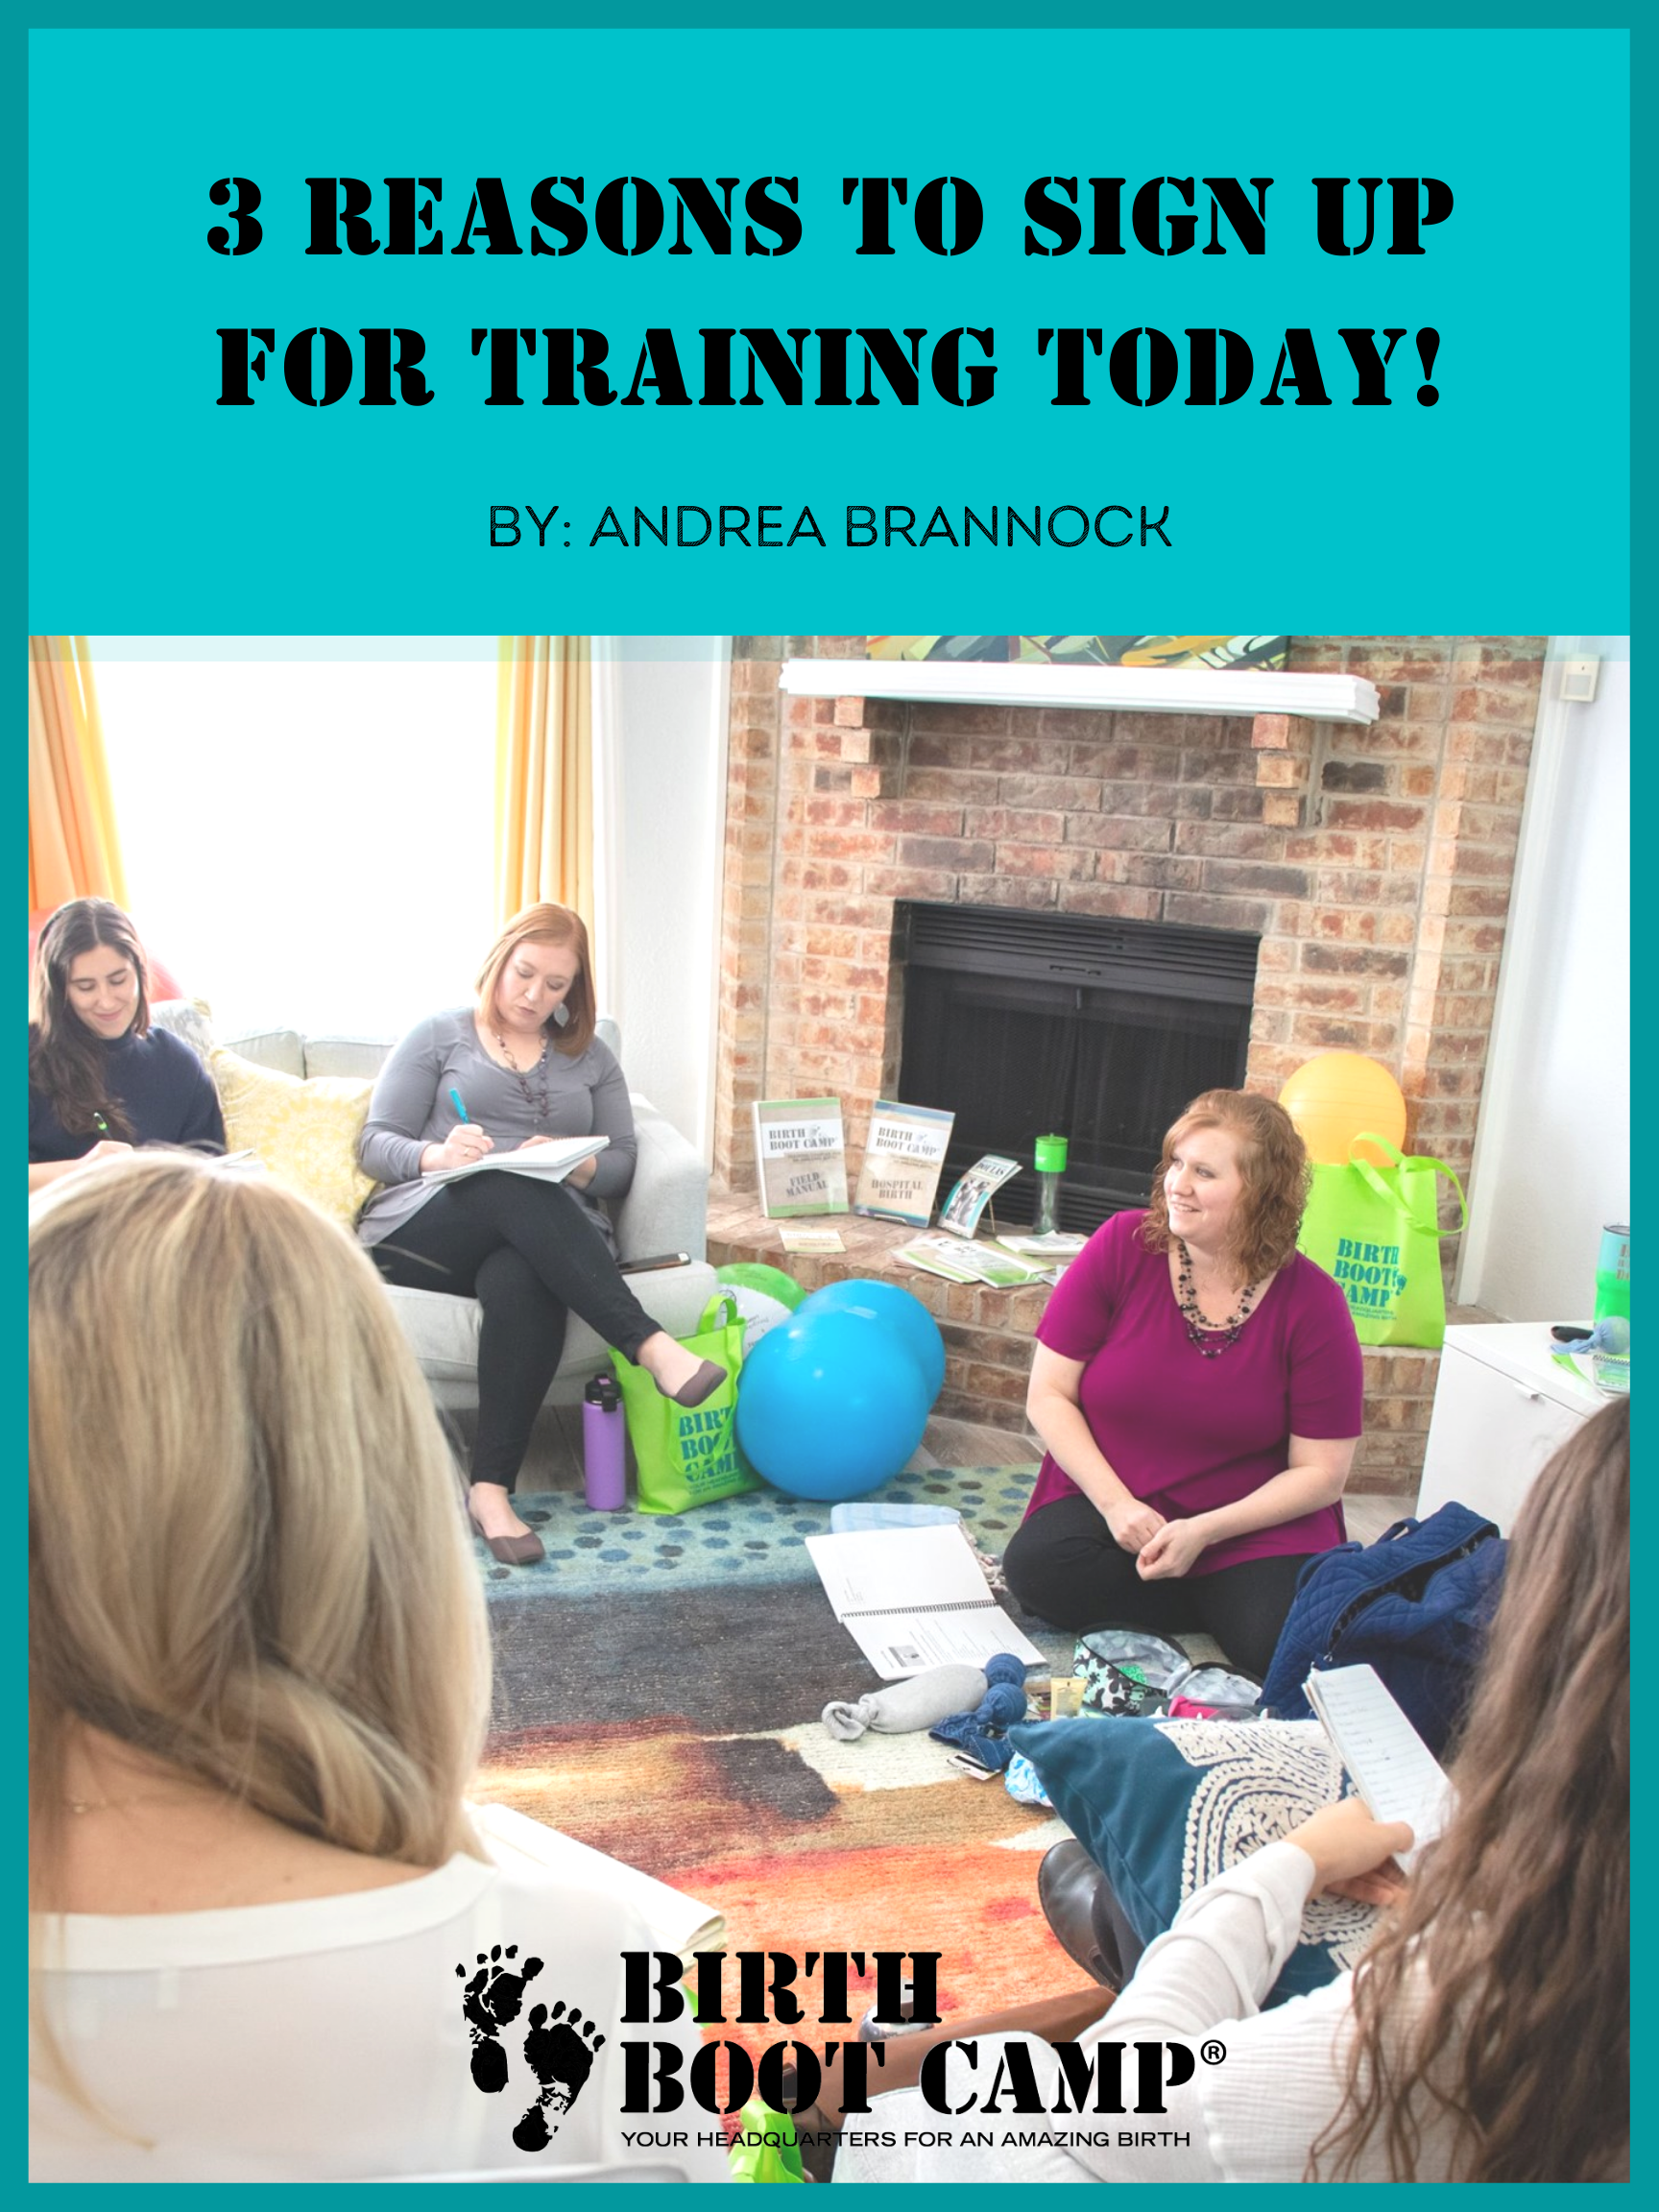 3 Reasons to Sign Up for Training TODAY!